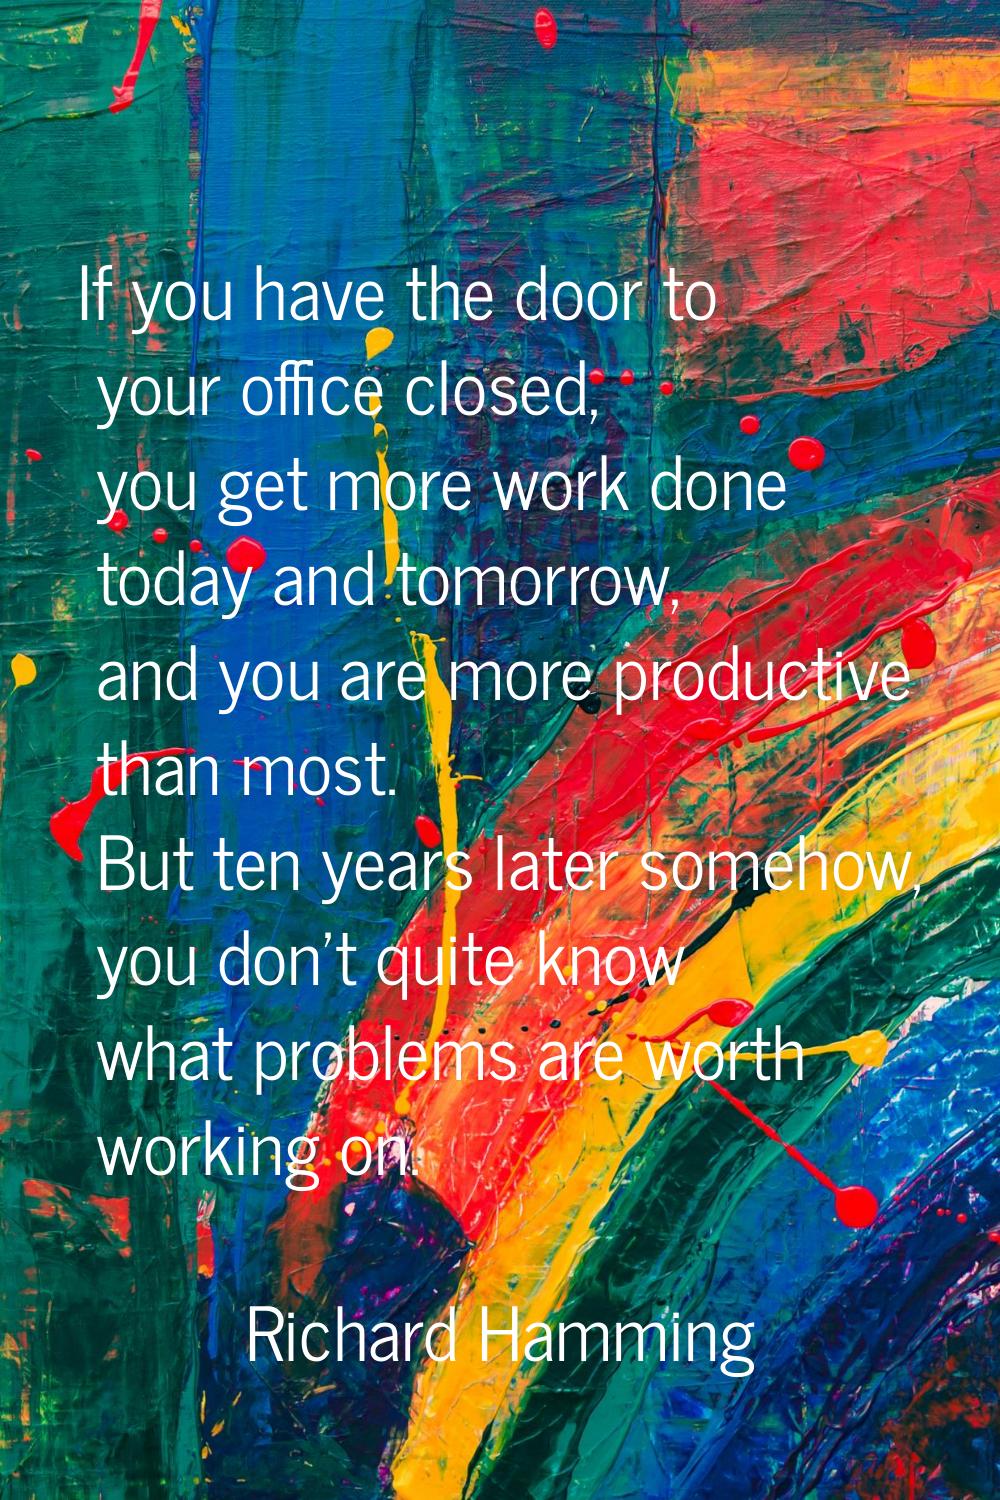 If you have the door to your office closed, you get more work done today and tomorrow, and you are 